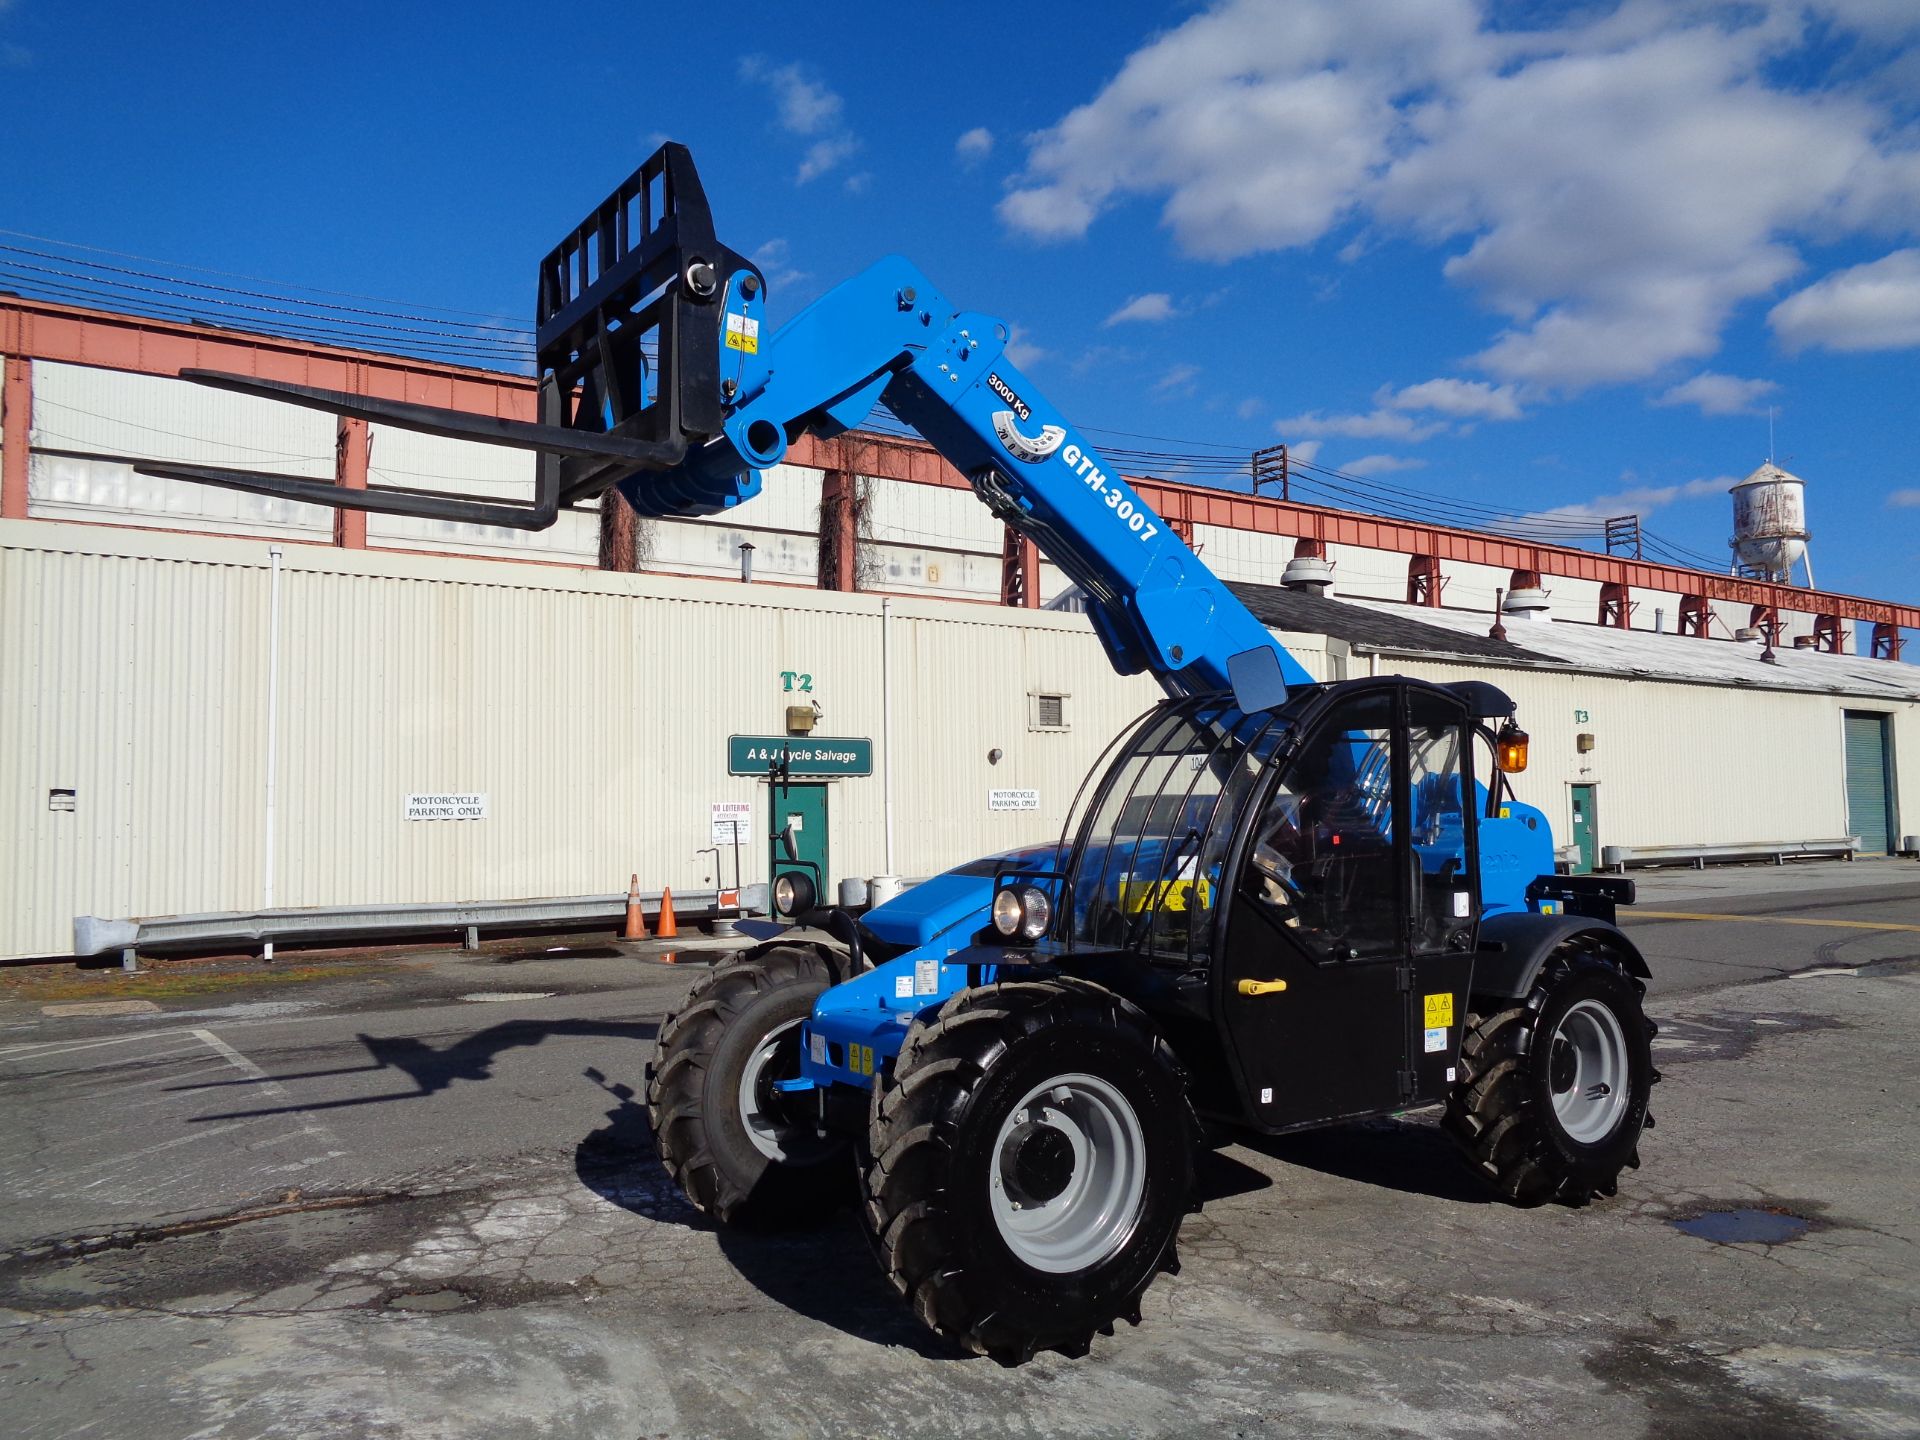 New Unused 2018 Genie GTH3007 Telescopic Forklift 6,600 lbs - Enclosed Cab - Image 12 of 23